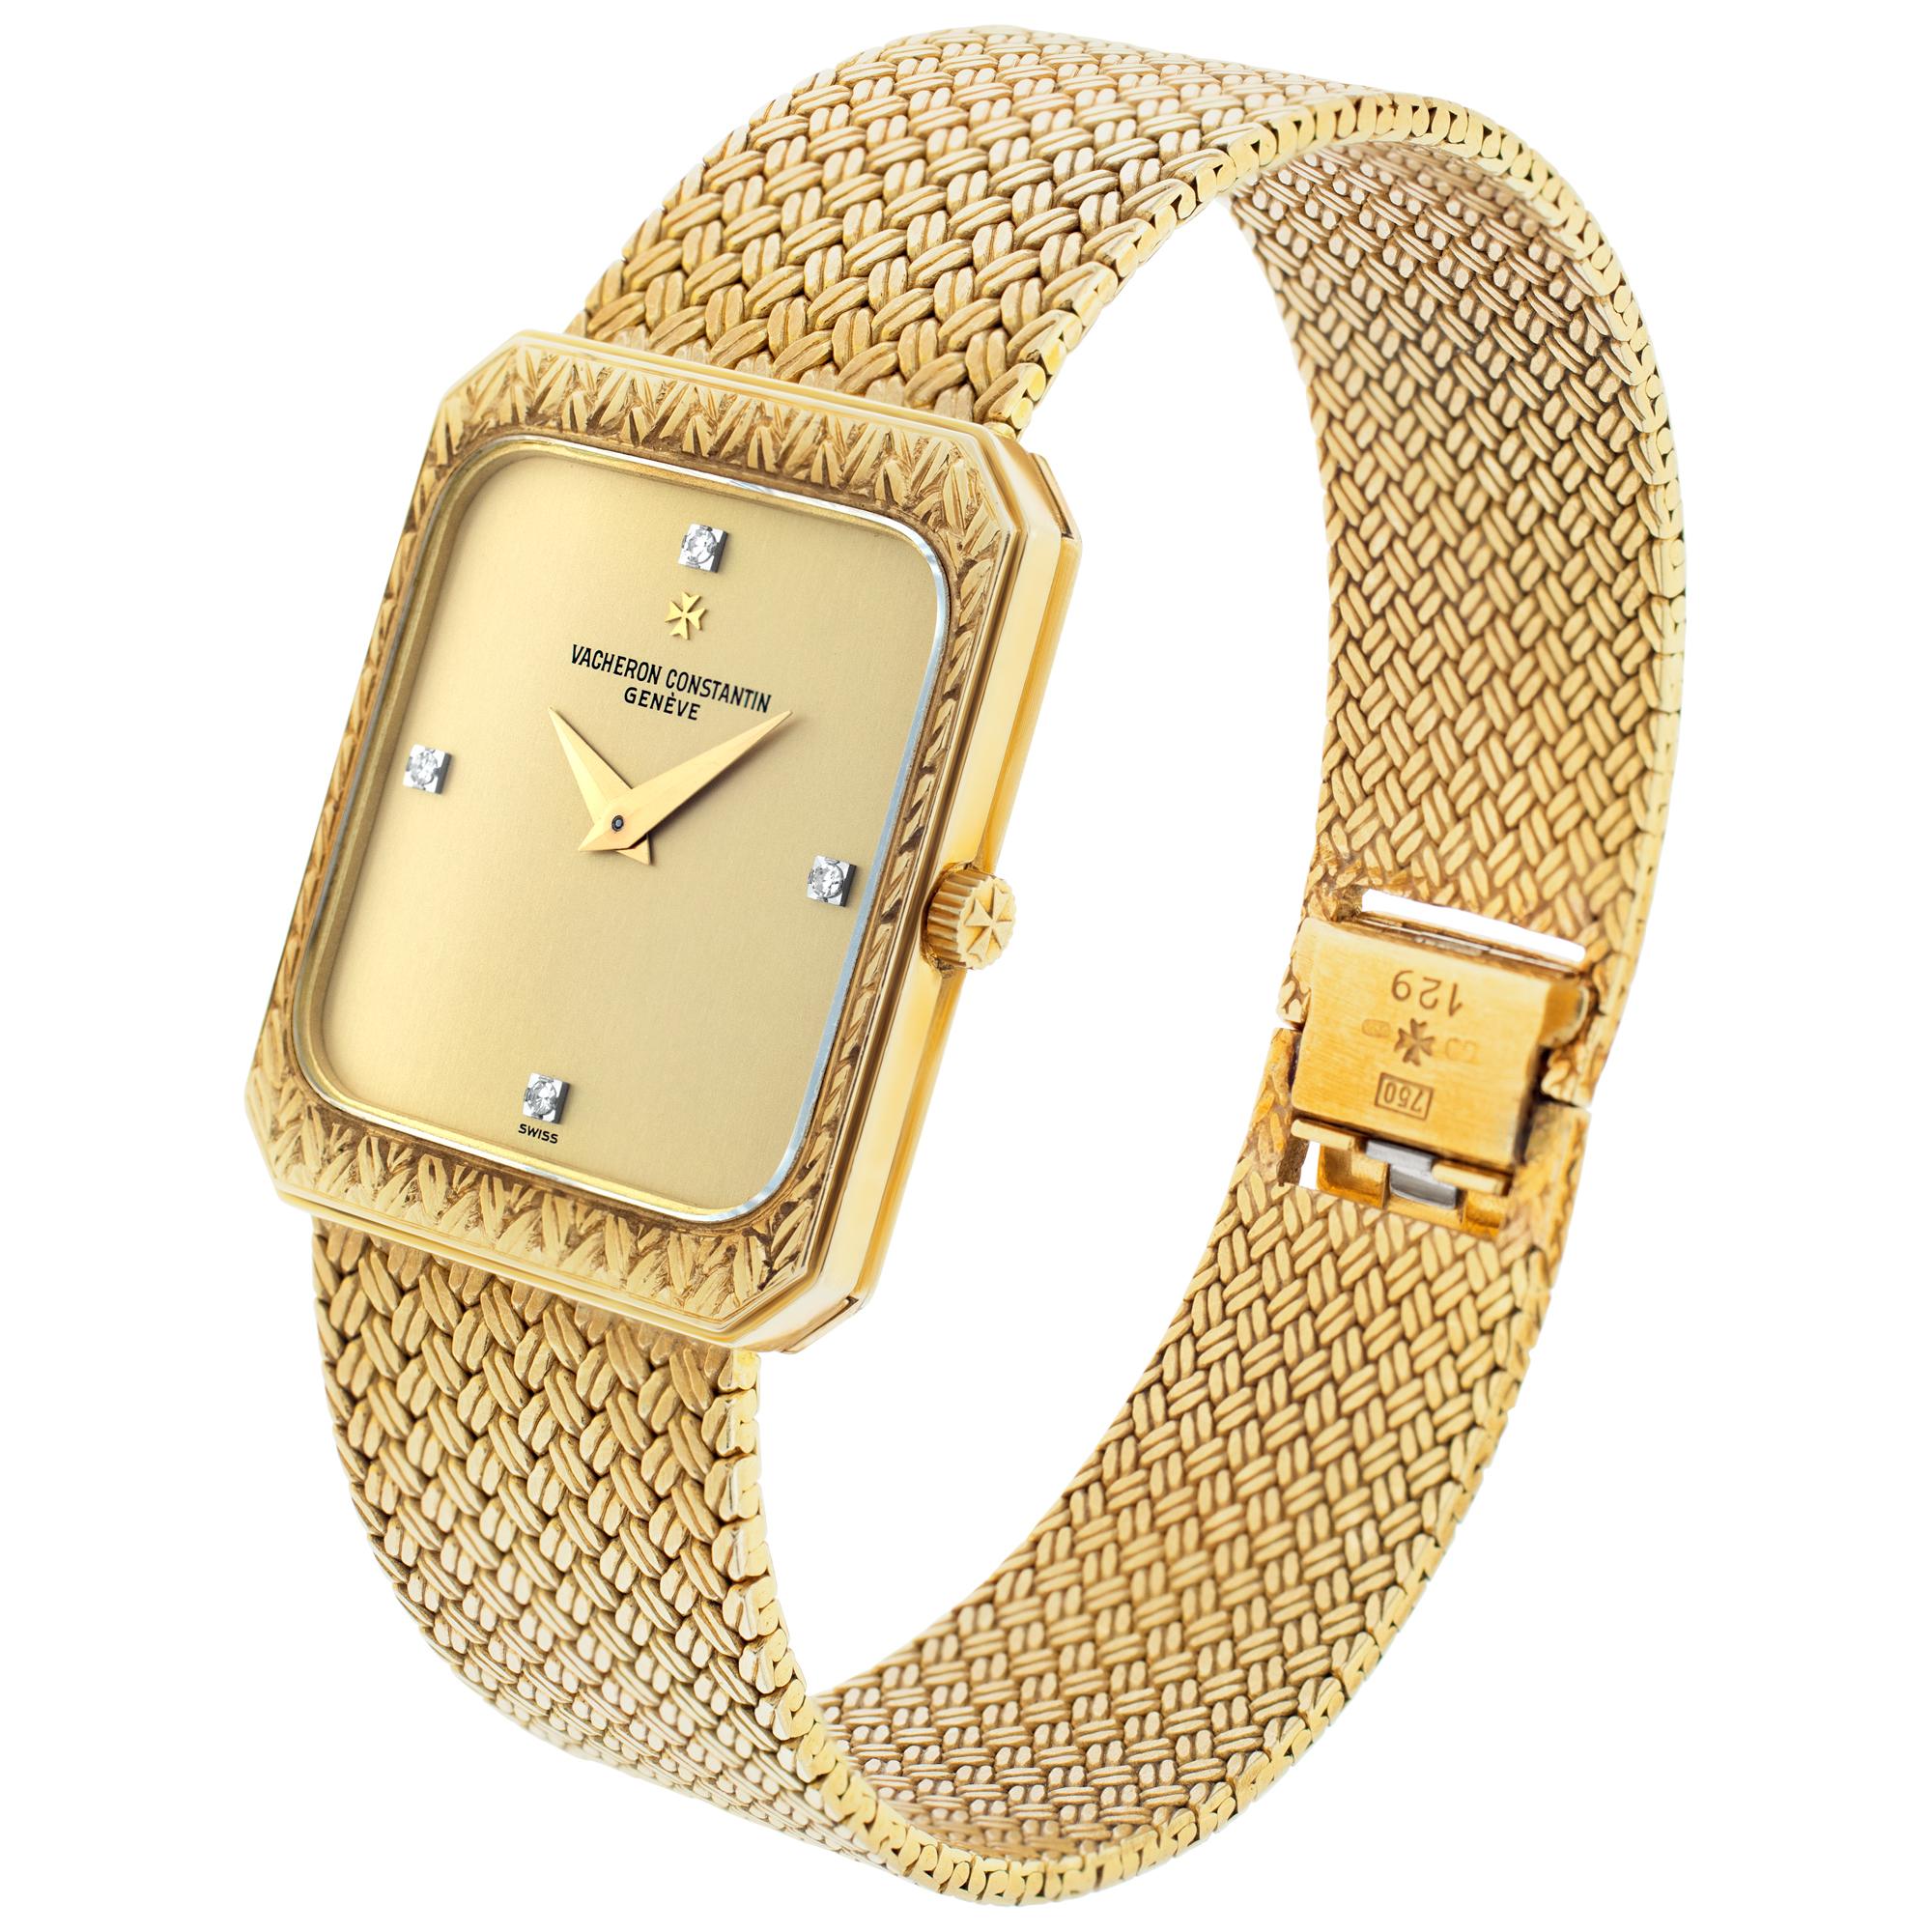 Vacheron Constantin Ultra-Thin with gold diamond dial in 18k yellow gold on a mesh band. Manual. 24 mm case size. Ref 5156. will fit up to a 6.7